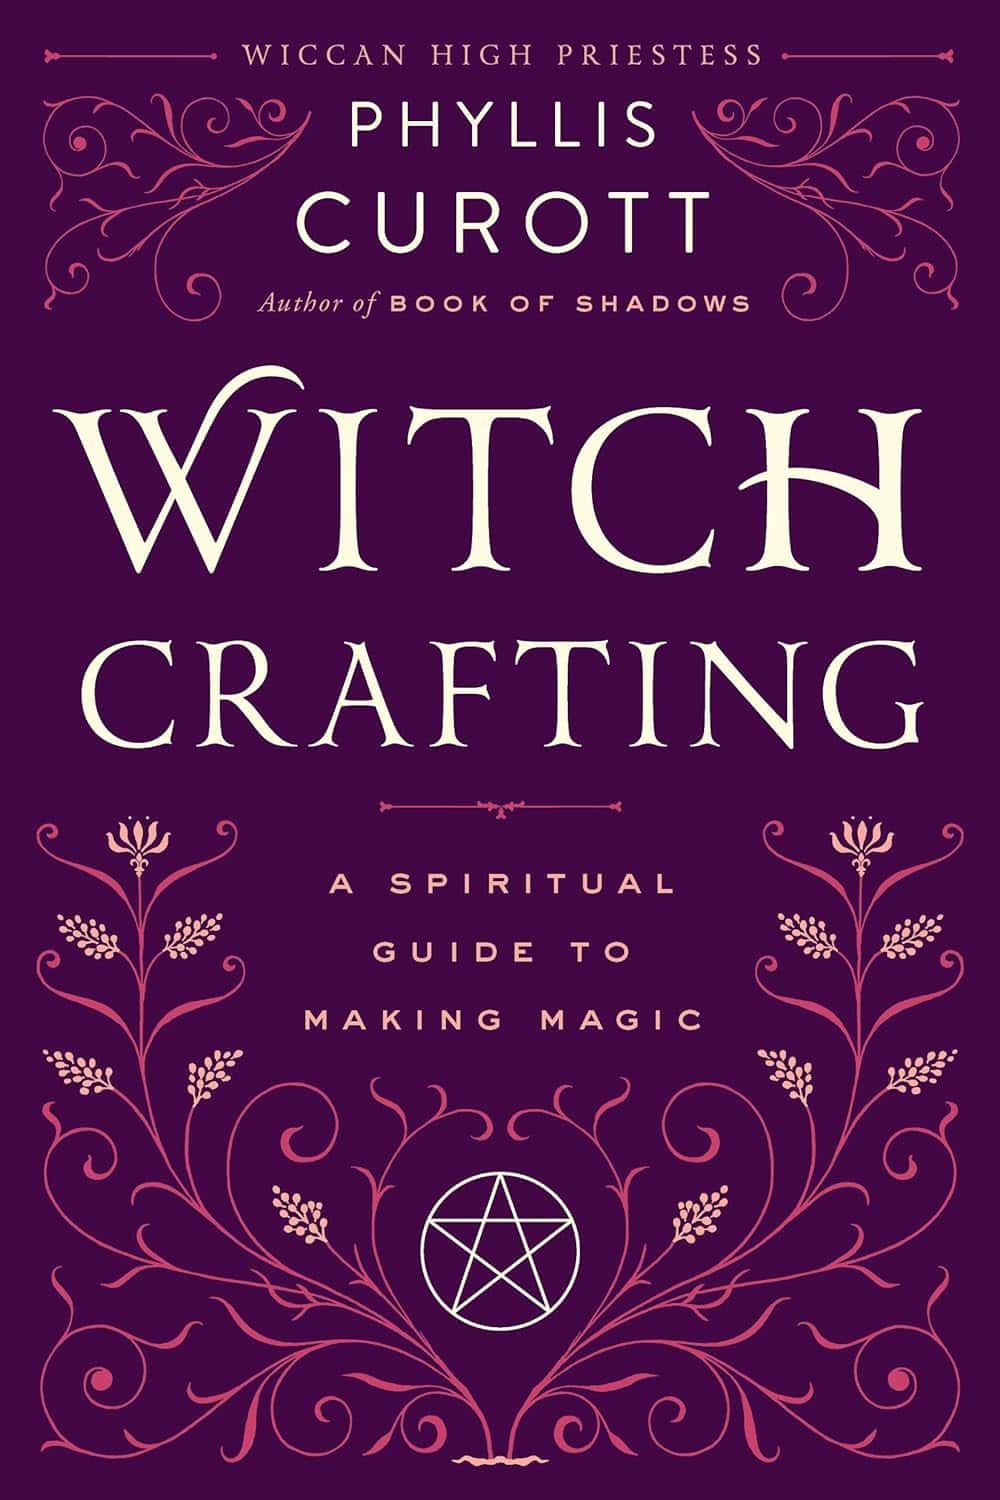 "Witch Crafting" by Phyllis Curott